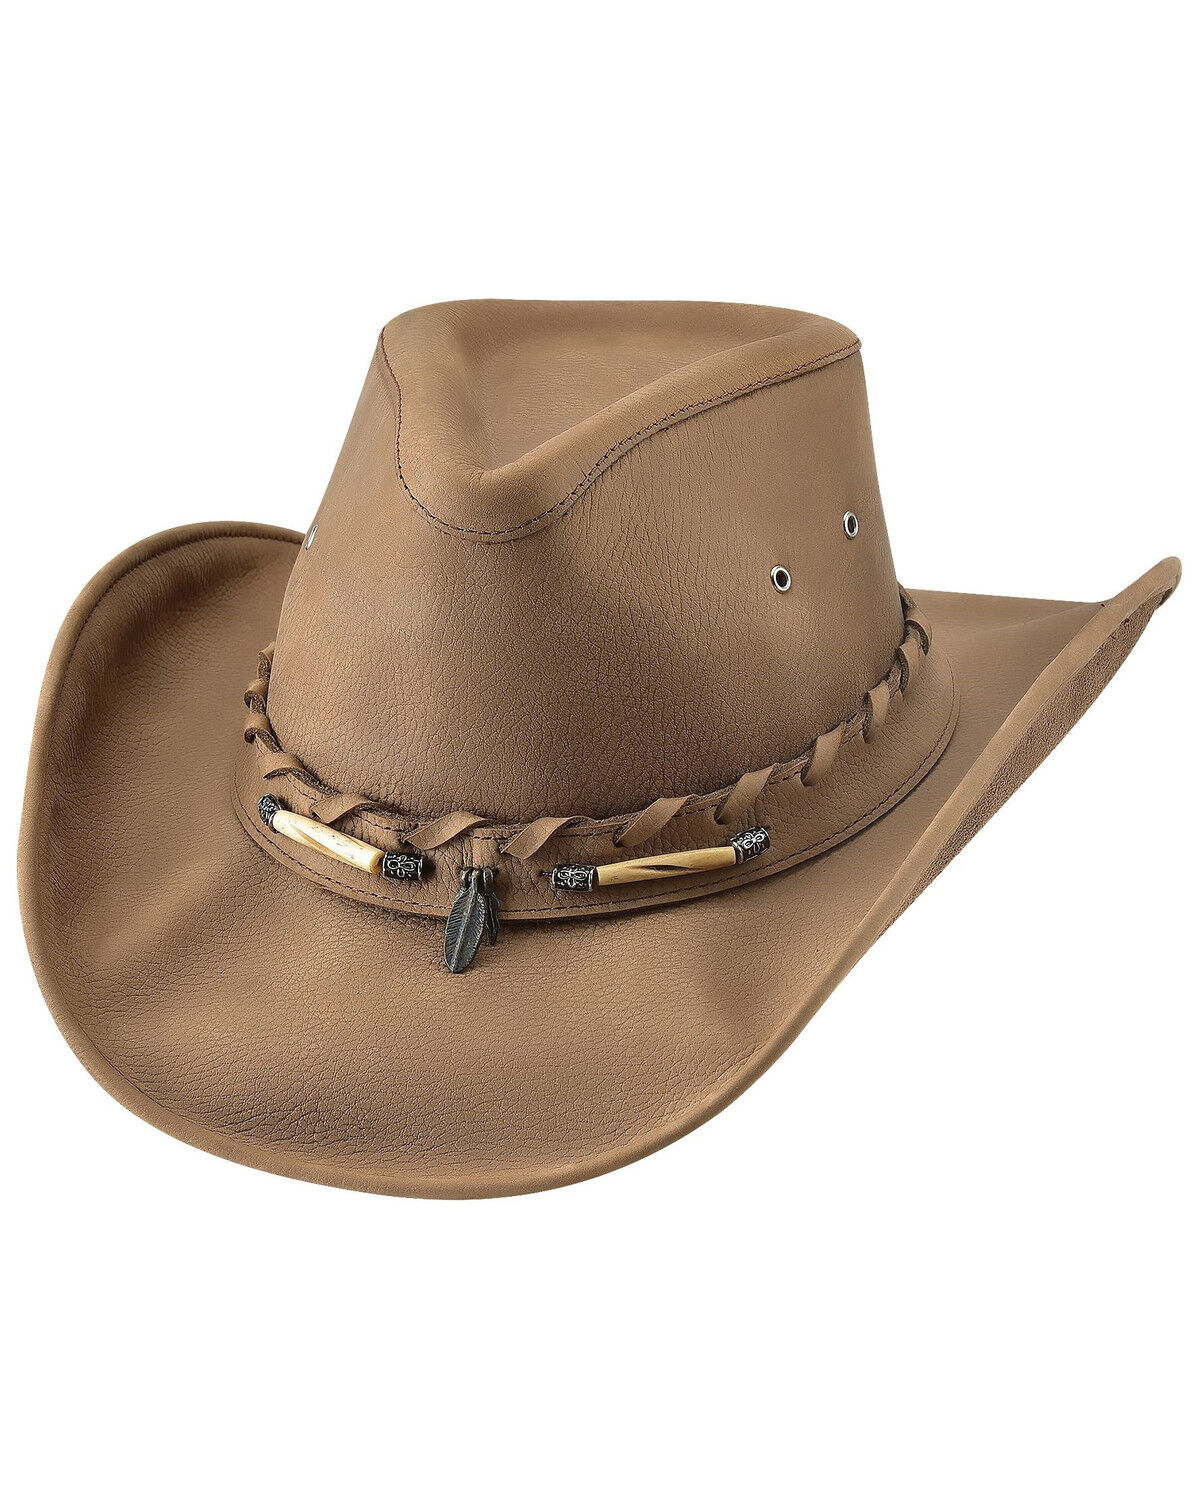 Bullhide Hats Born to Ride Leather Western Cowboy Hat 4014BL